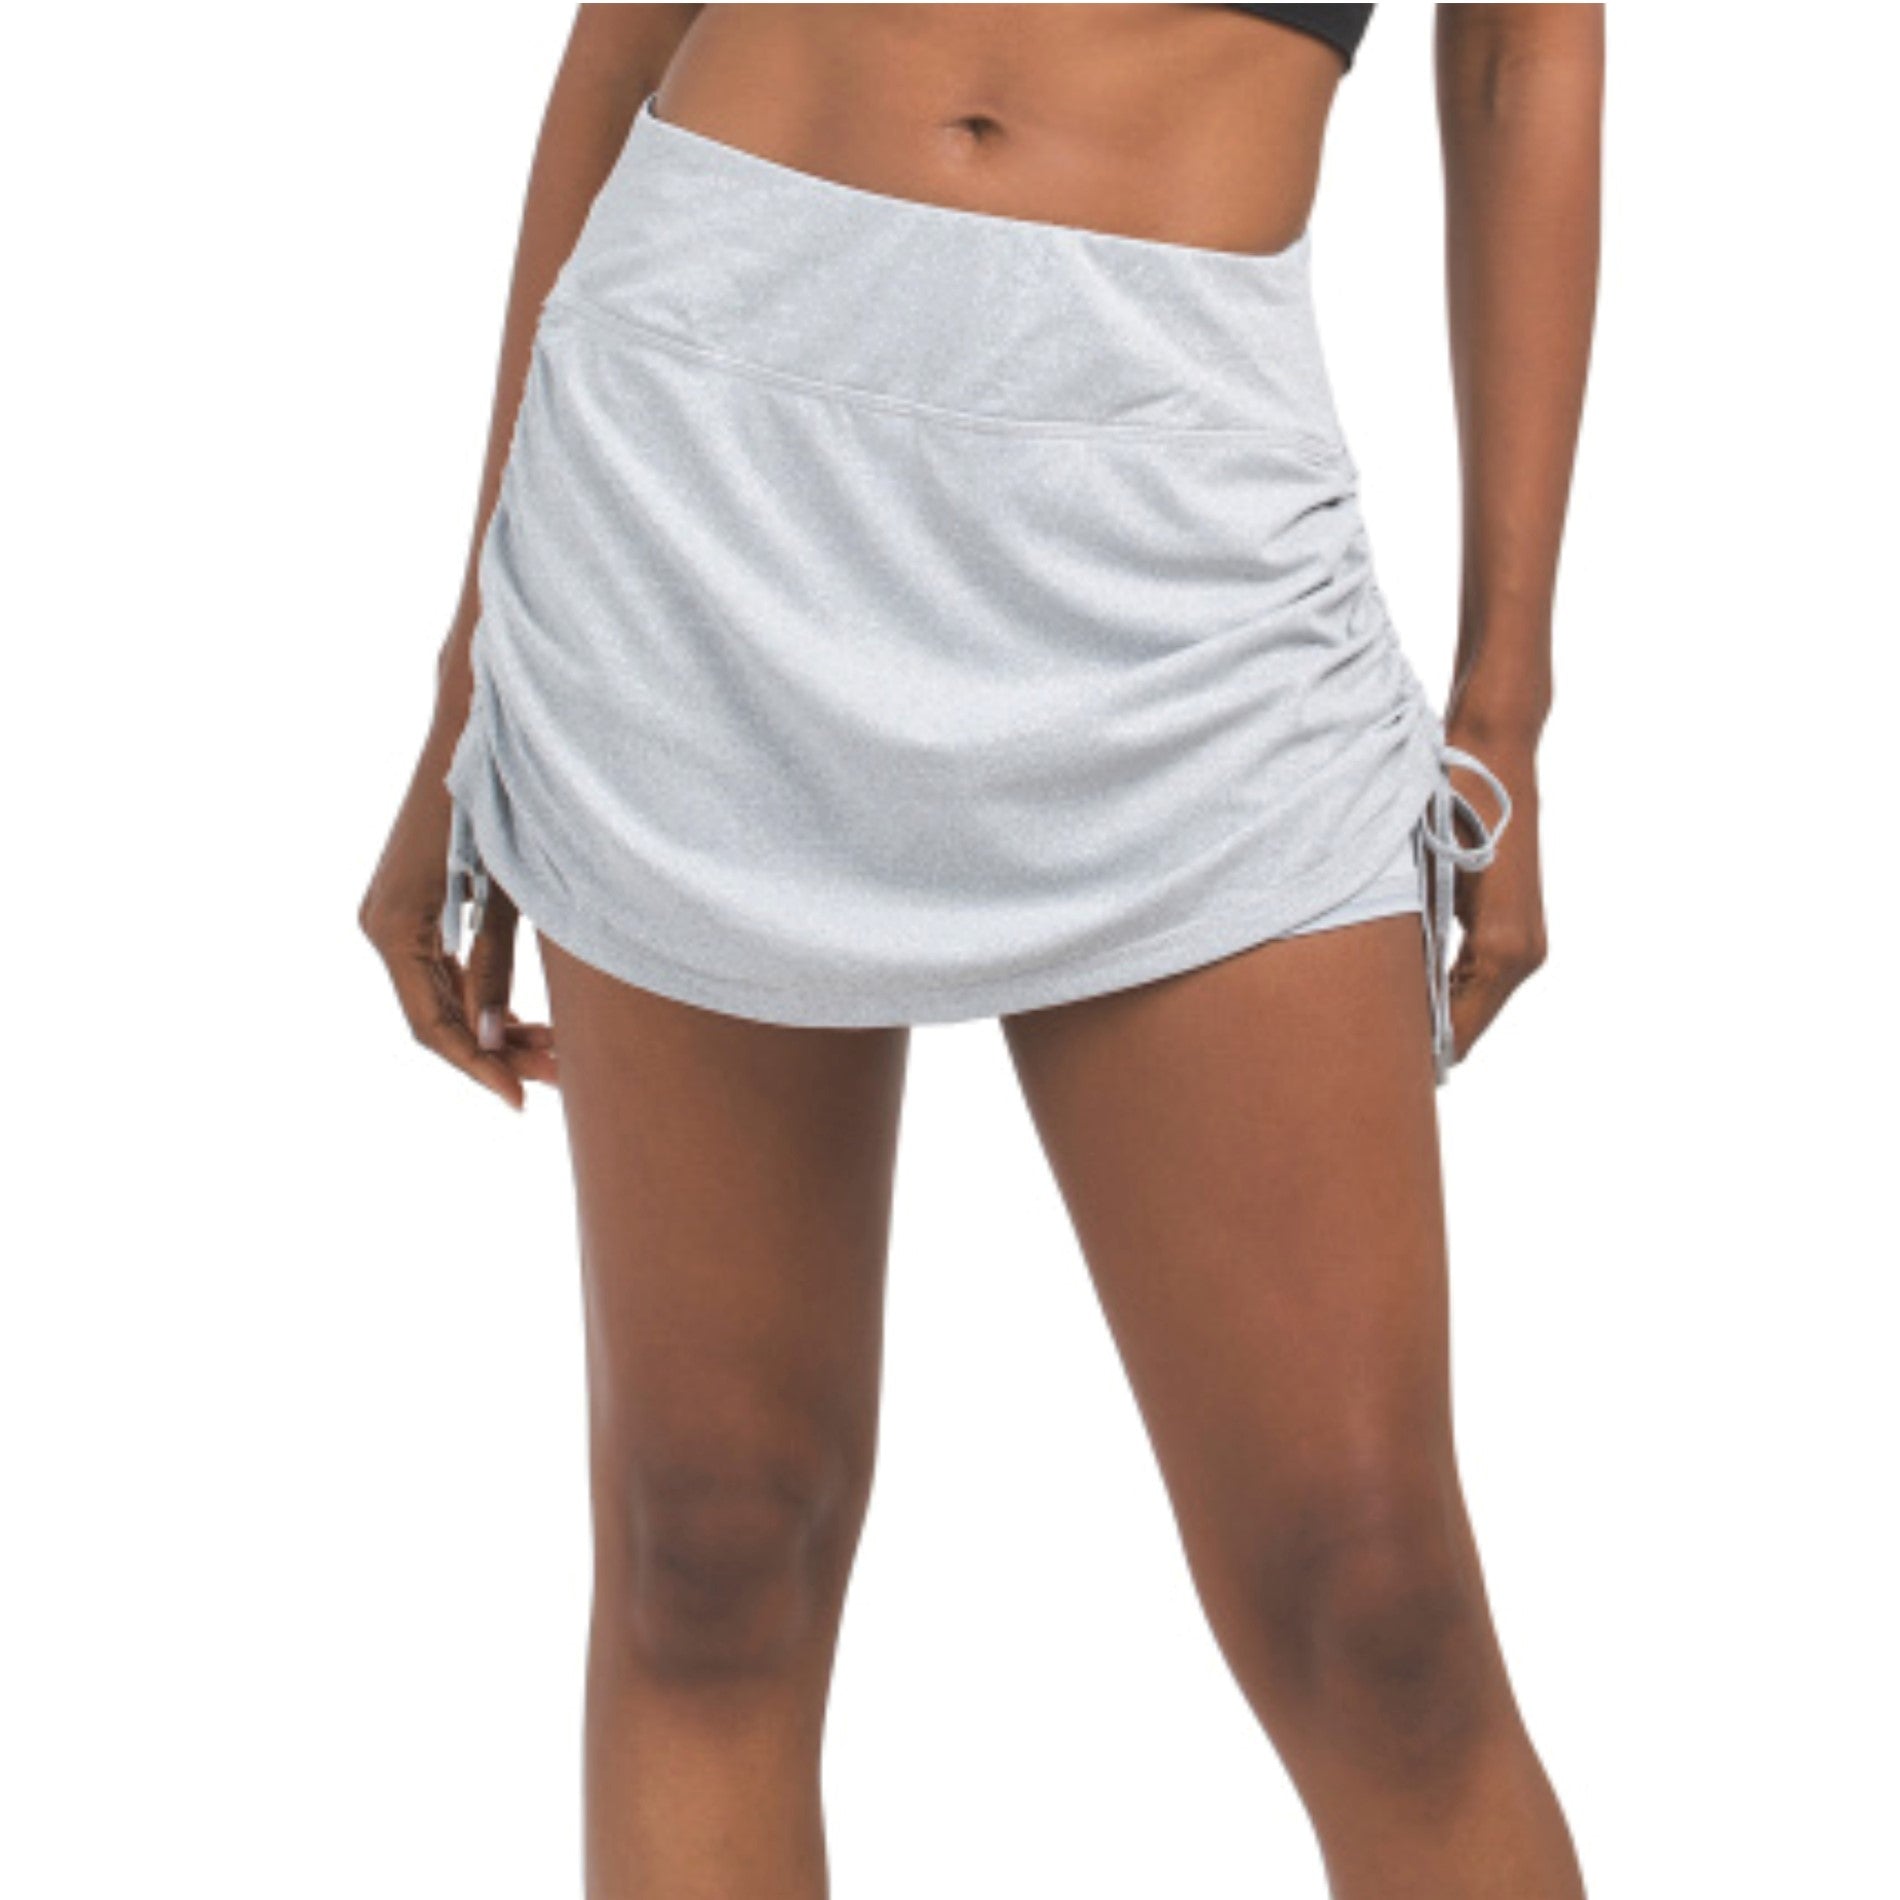 Kyodan Elastic Waistband Built-in Shorts Ruched Side Skort – Letay Store